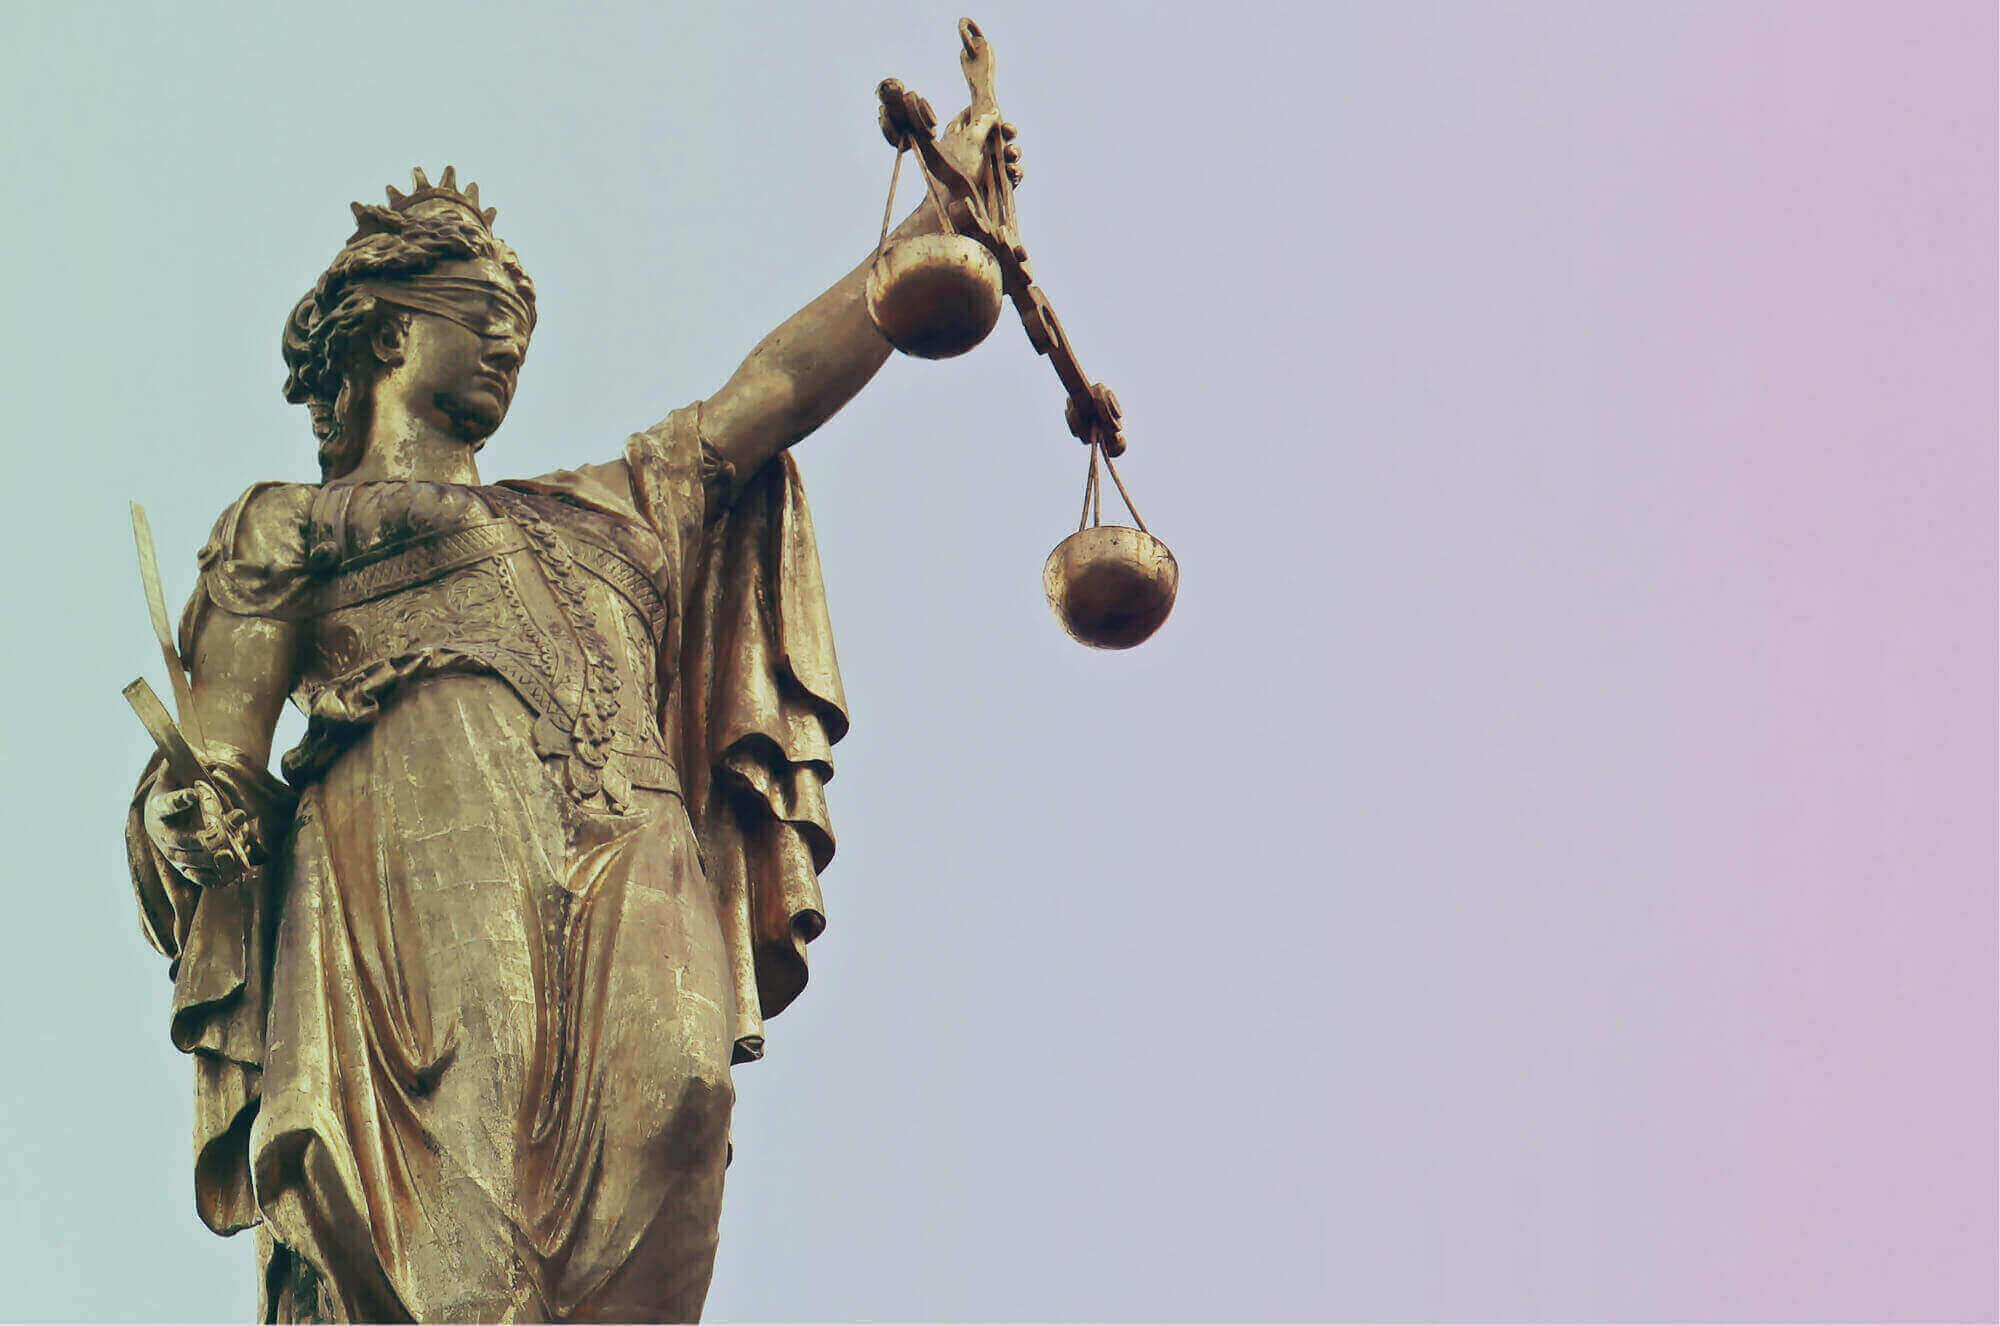 Expert witness bias and its effects on the justice system